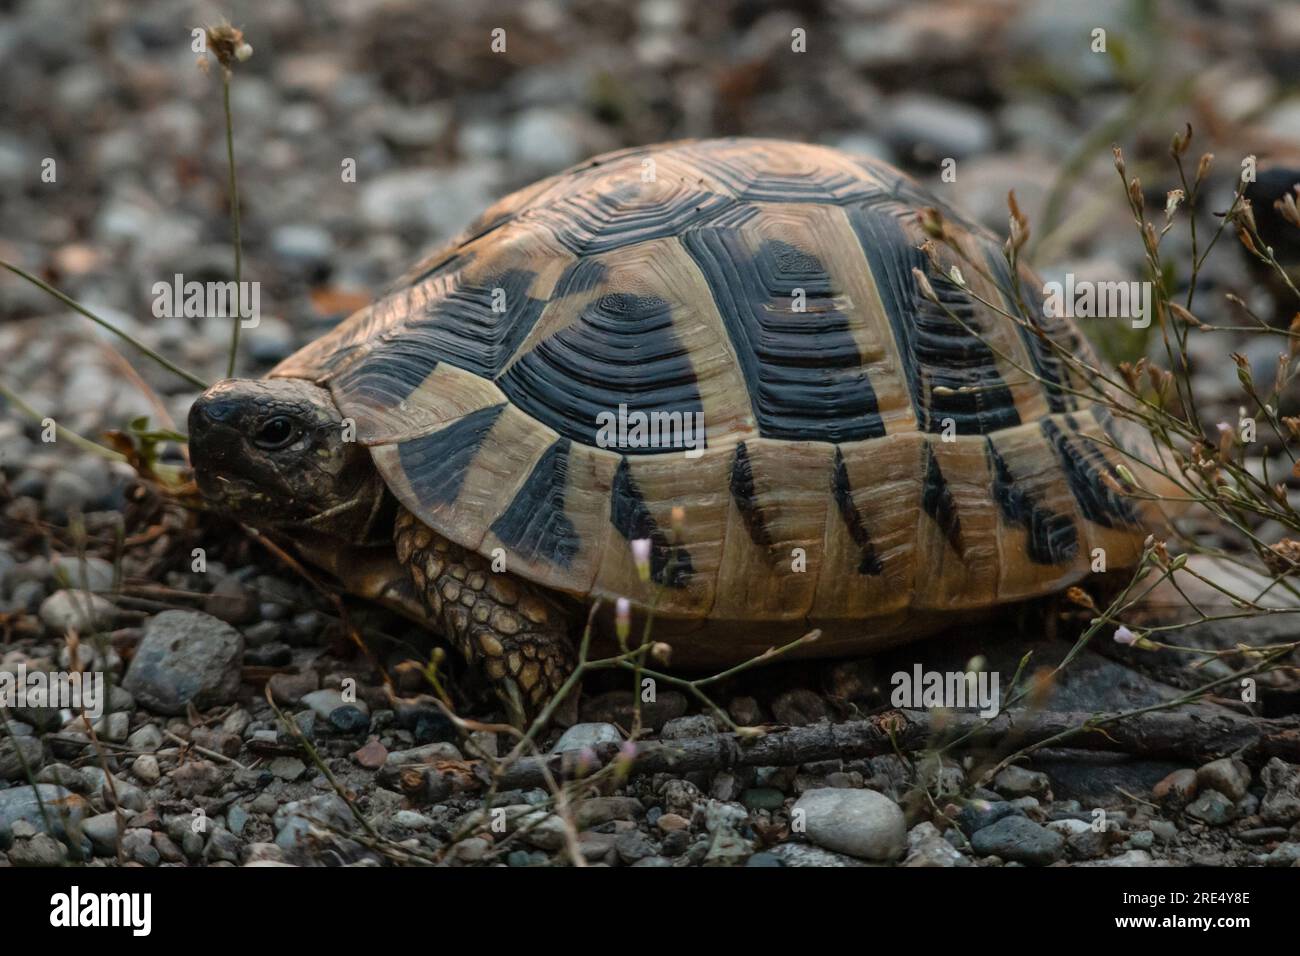 A baby Hermann's tortoise / turtle with a colorful black and green shell on rocky beach during sunset Stock Photo